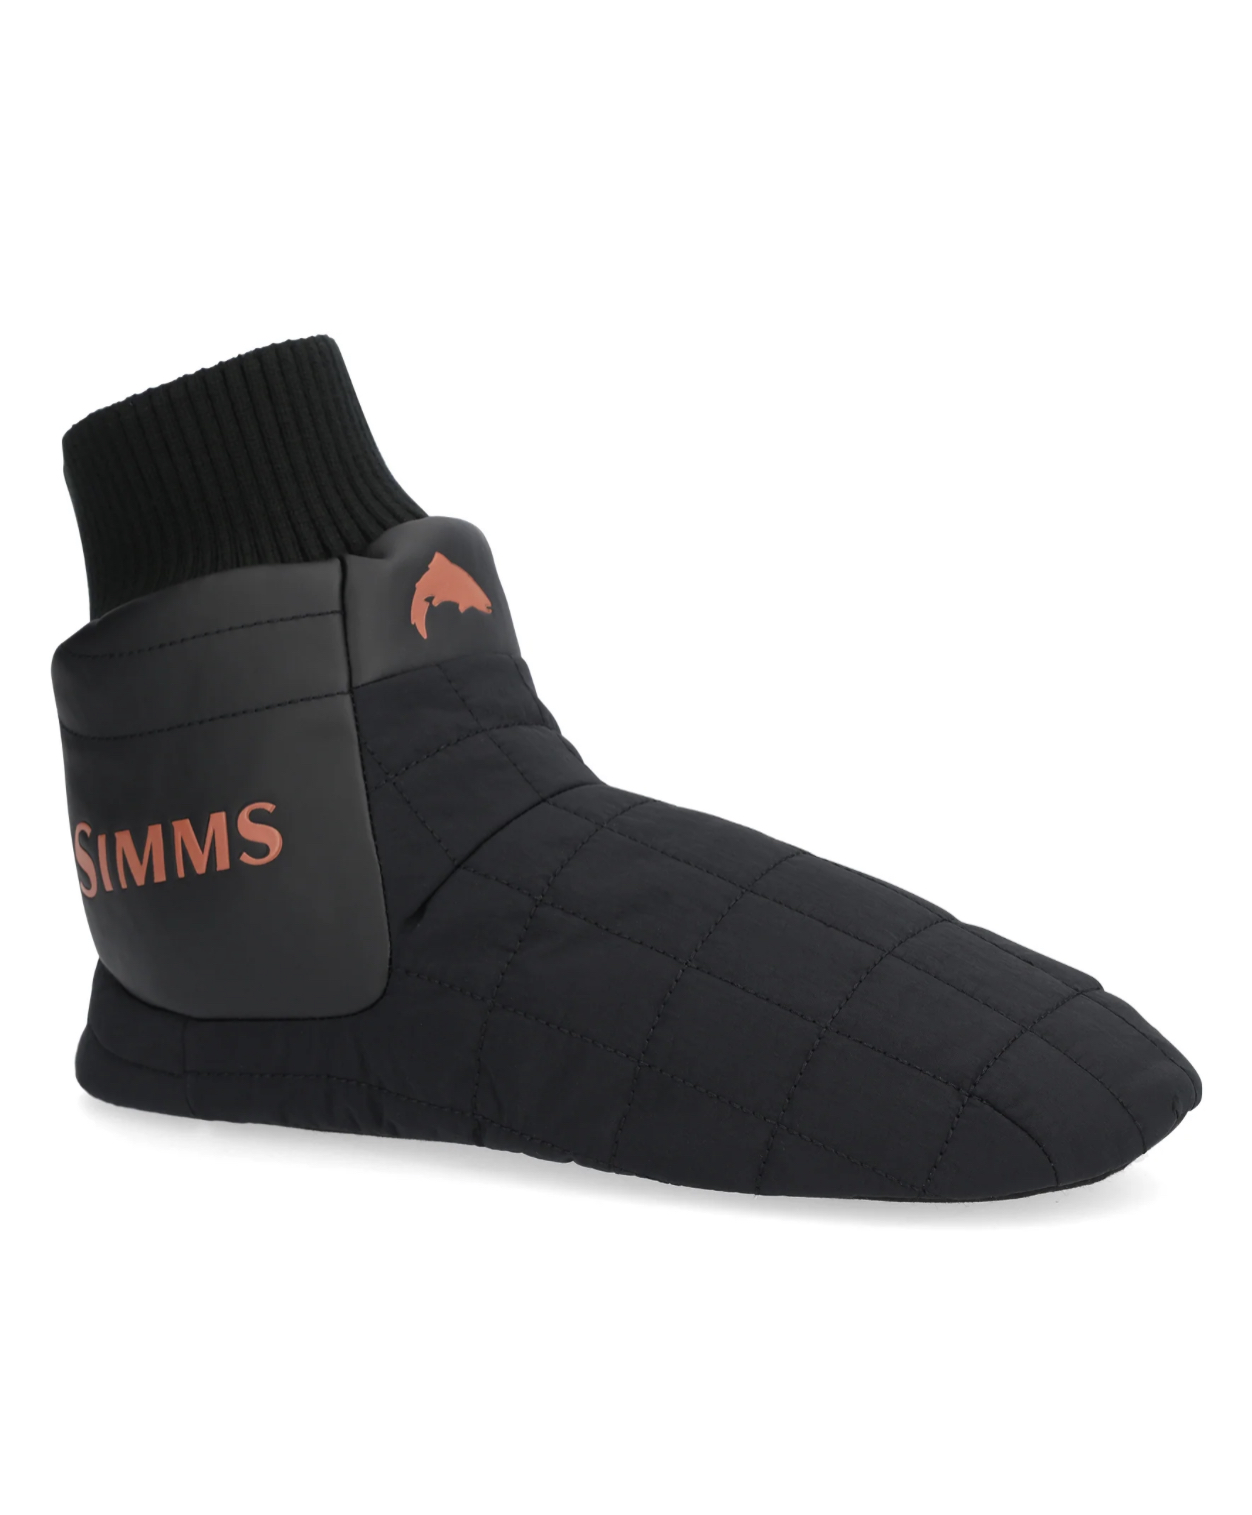 Simms Bulkley Insulated Bootie - Small